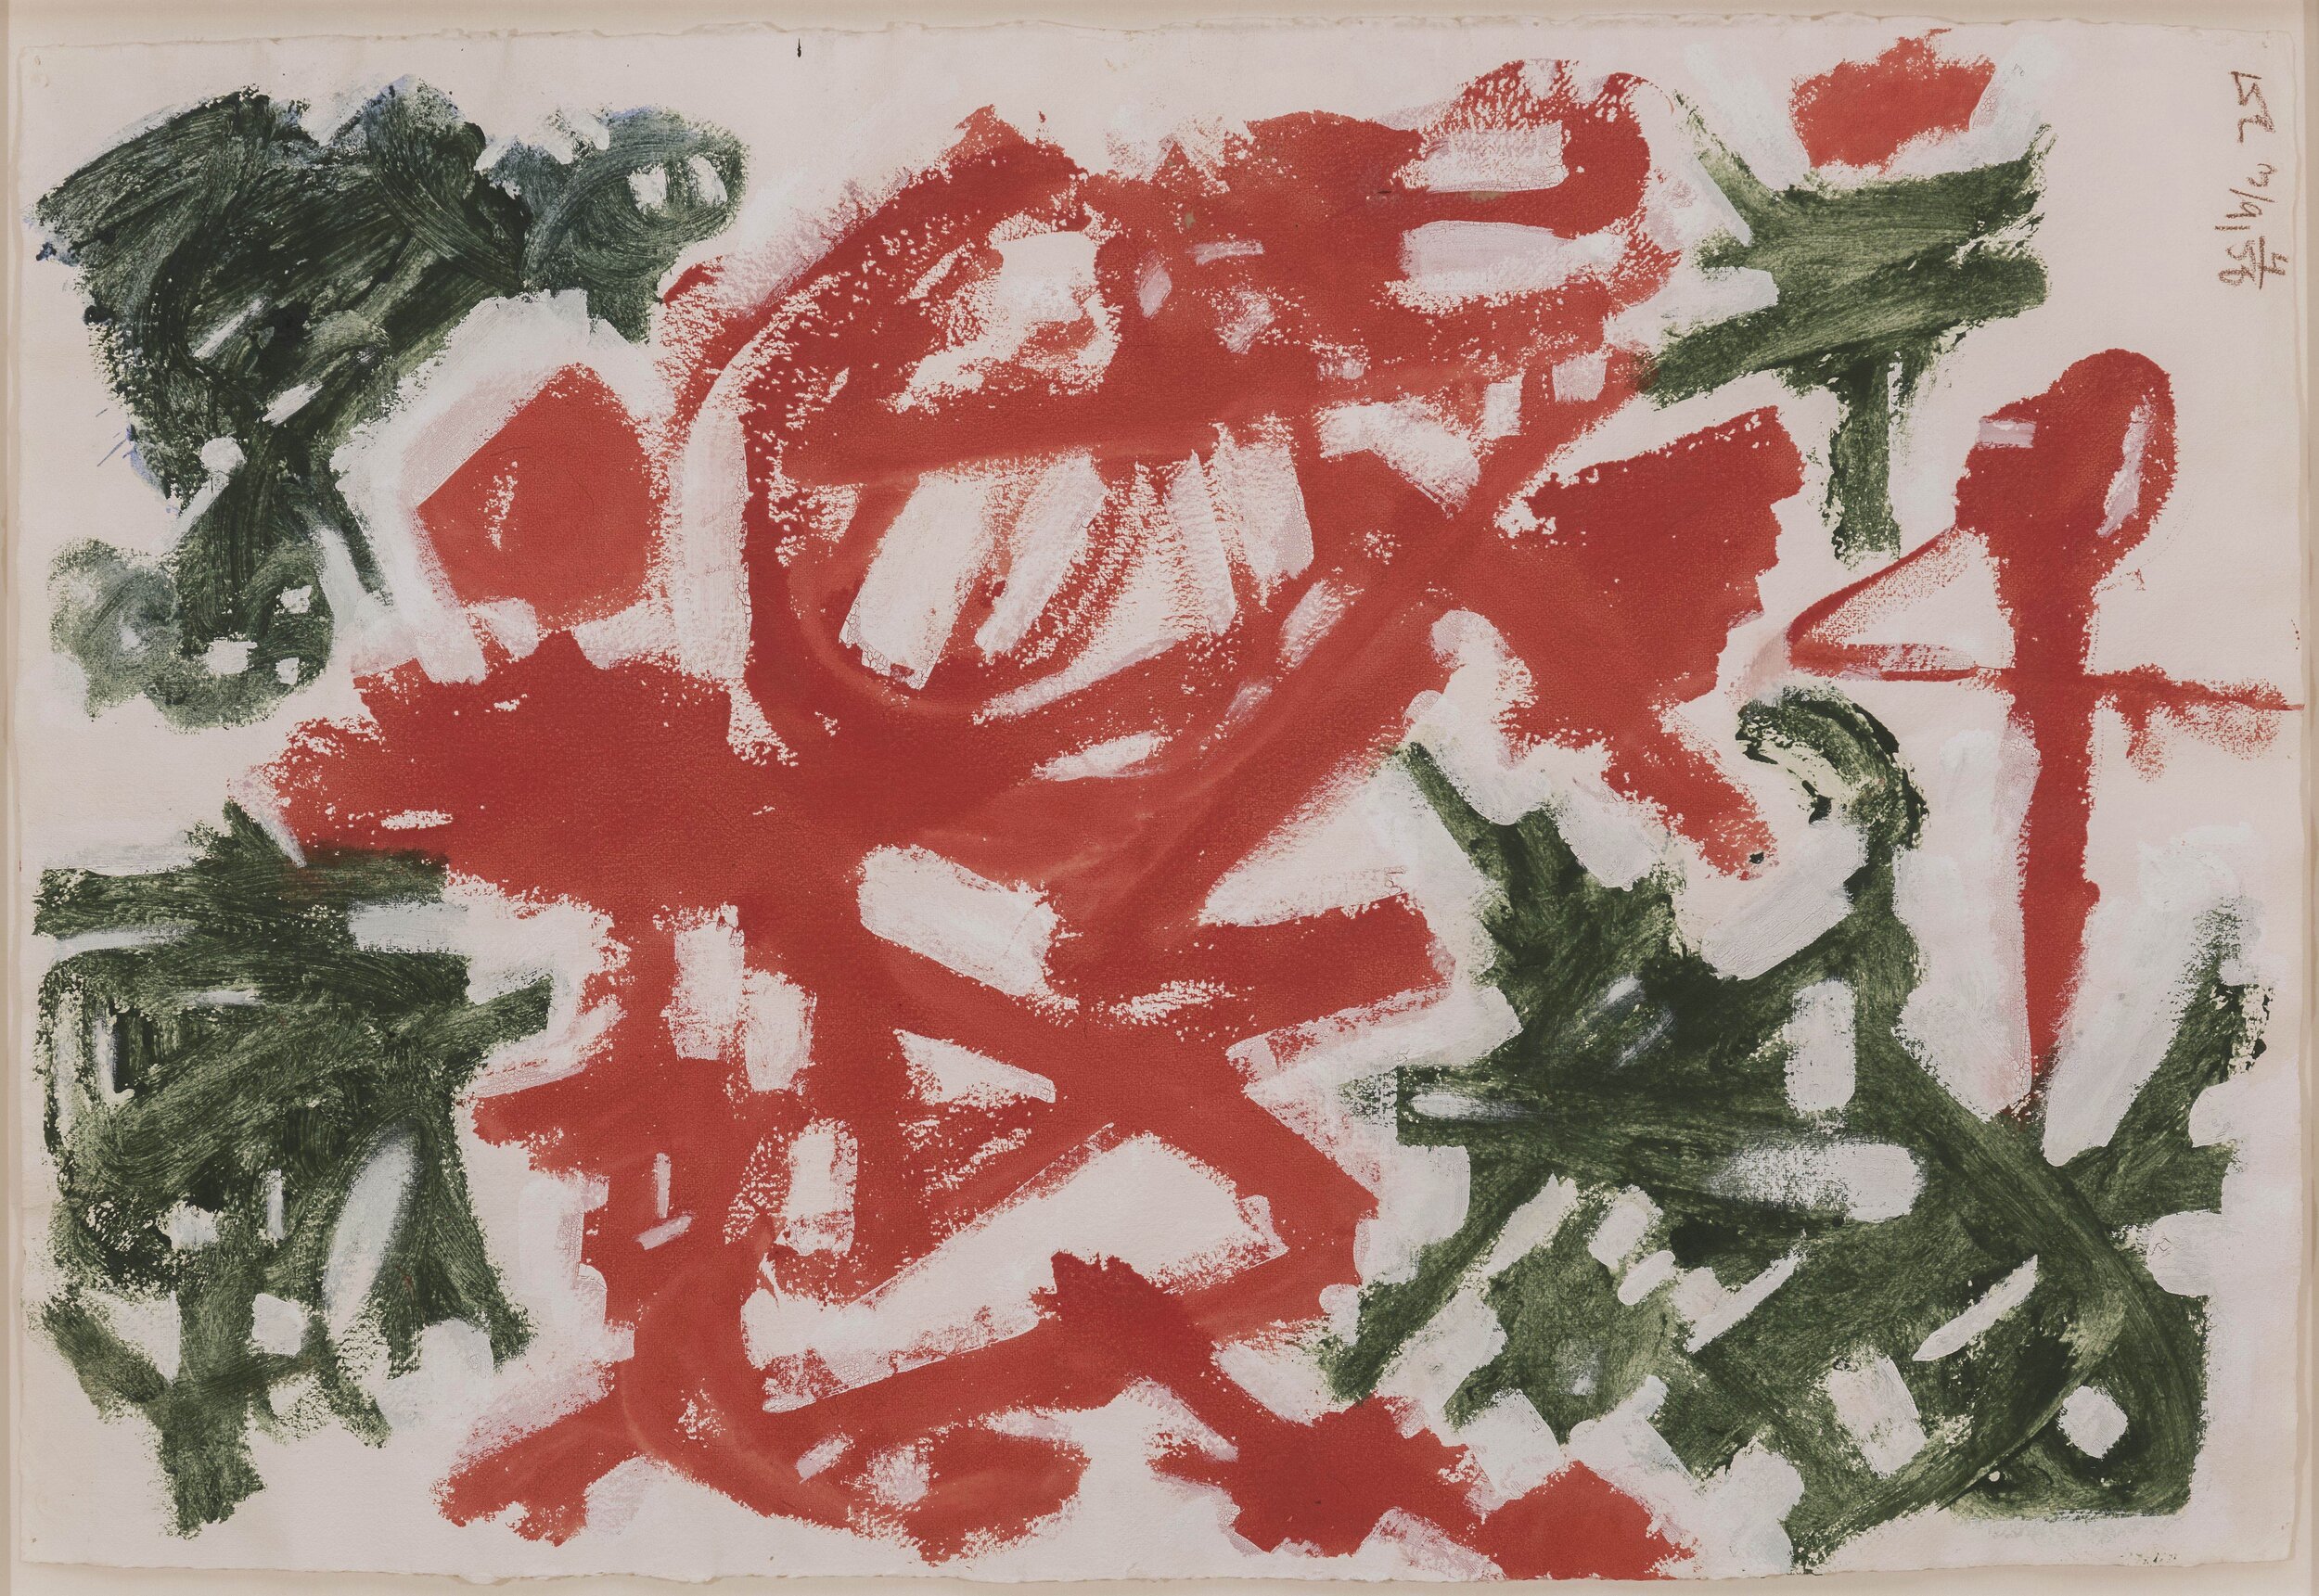 Abstract painting with red in the center and green in the corners